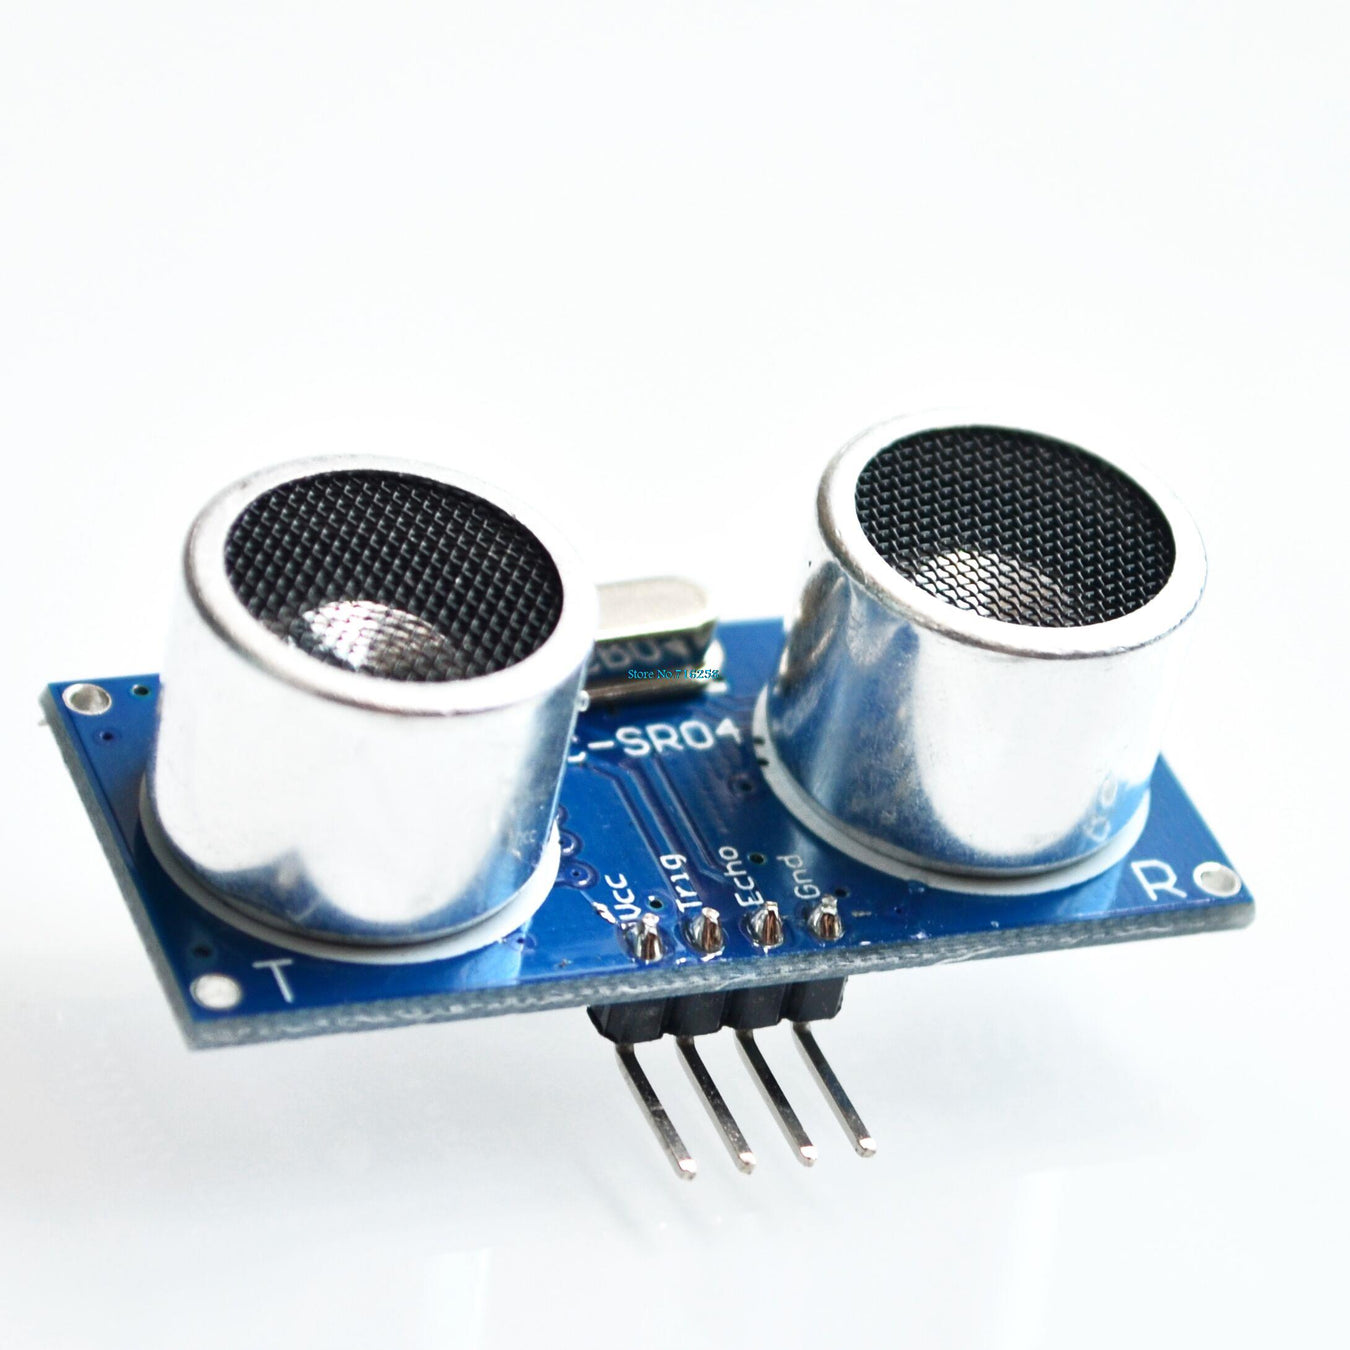 Ultrasonic Distance Sensors from PMD Way with free delivery, worldwide